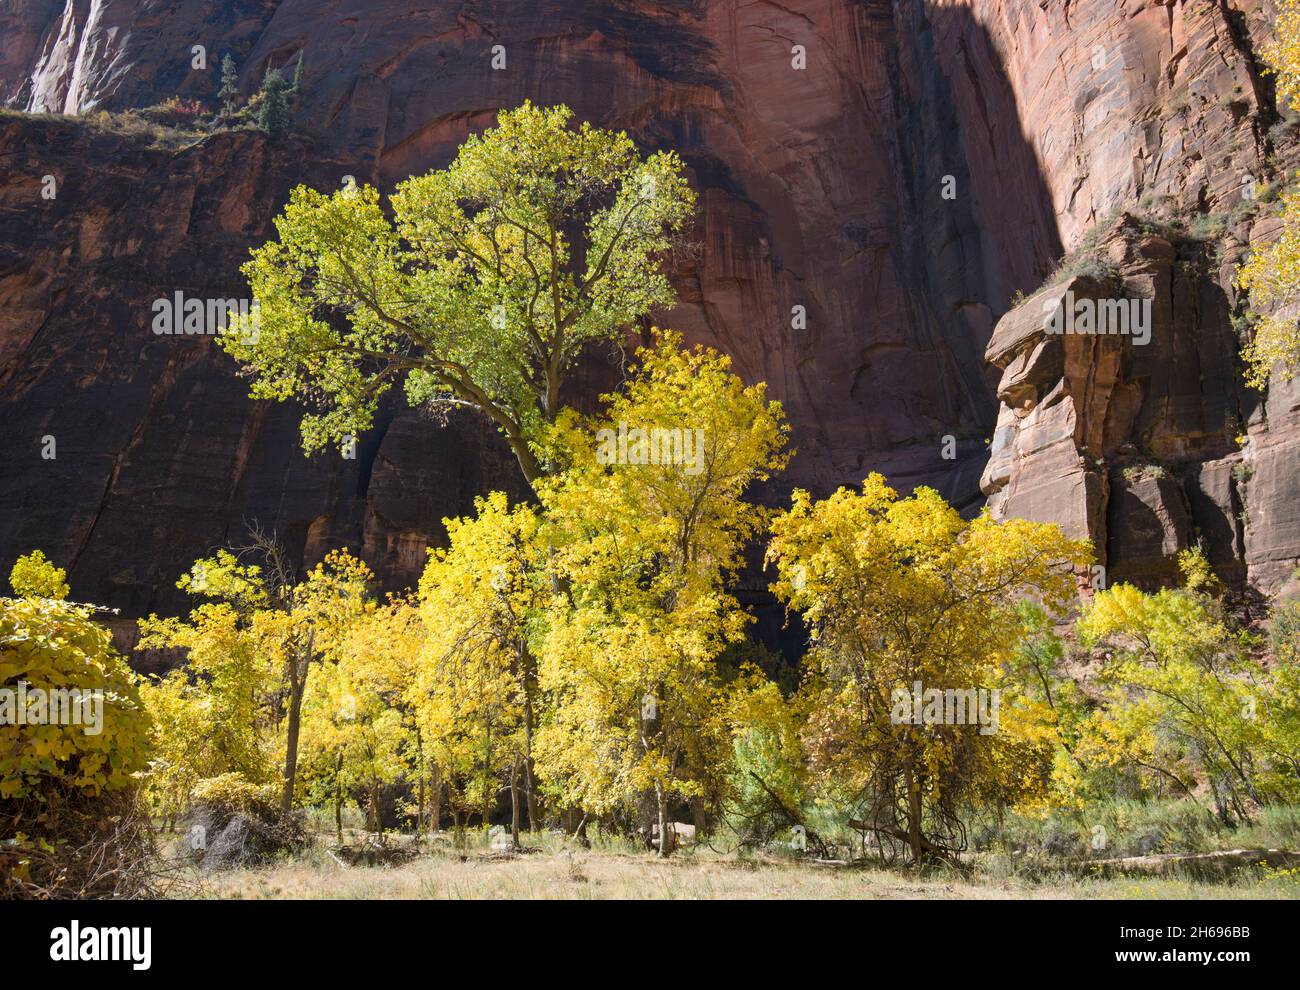 Zion National Park, Utah, USA. Cottonwood trees beside the Virgin River dwarfed by the towering sandstone cliffs of the Temple of Sinawava, autumn. Stock Photo